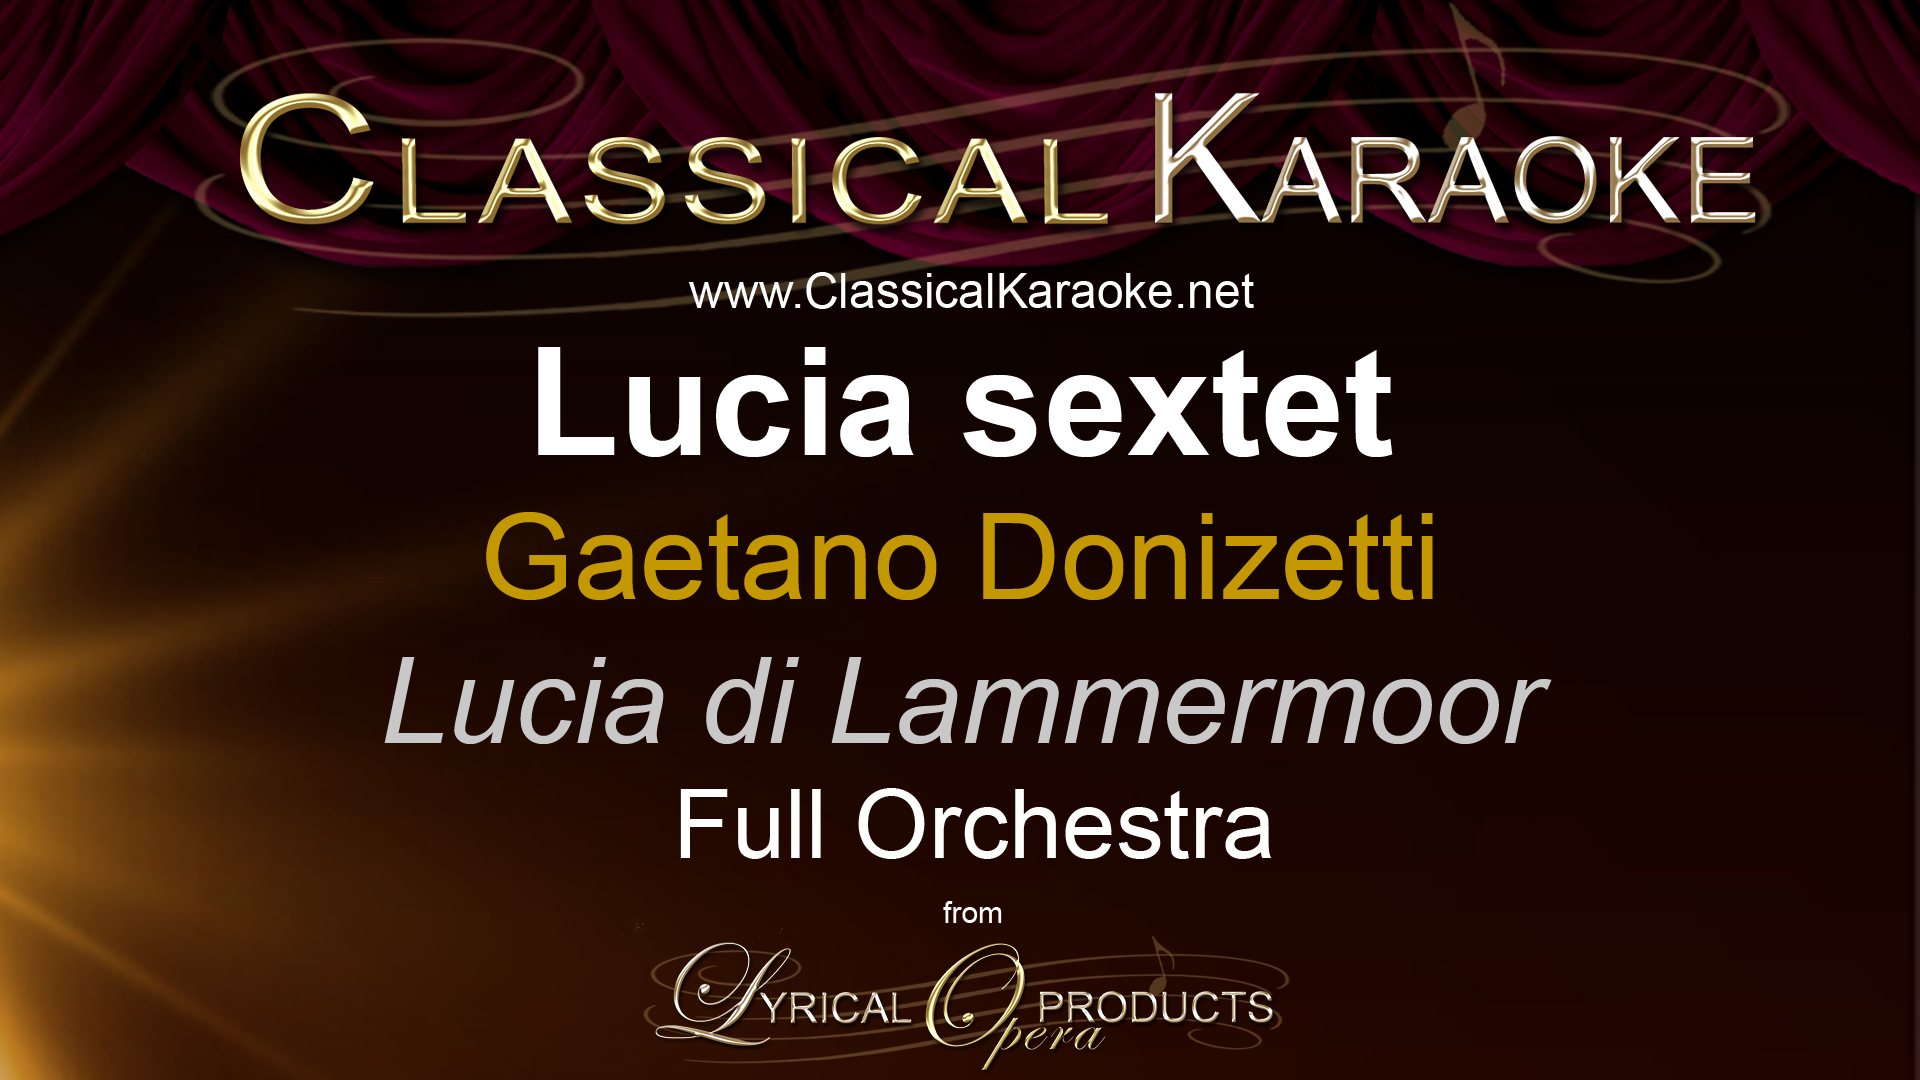 Lucia sextet, from Lucia di Lammermoor, by Donizetti, Full Orchestral Accompaniment (karaoke) track